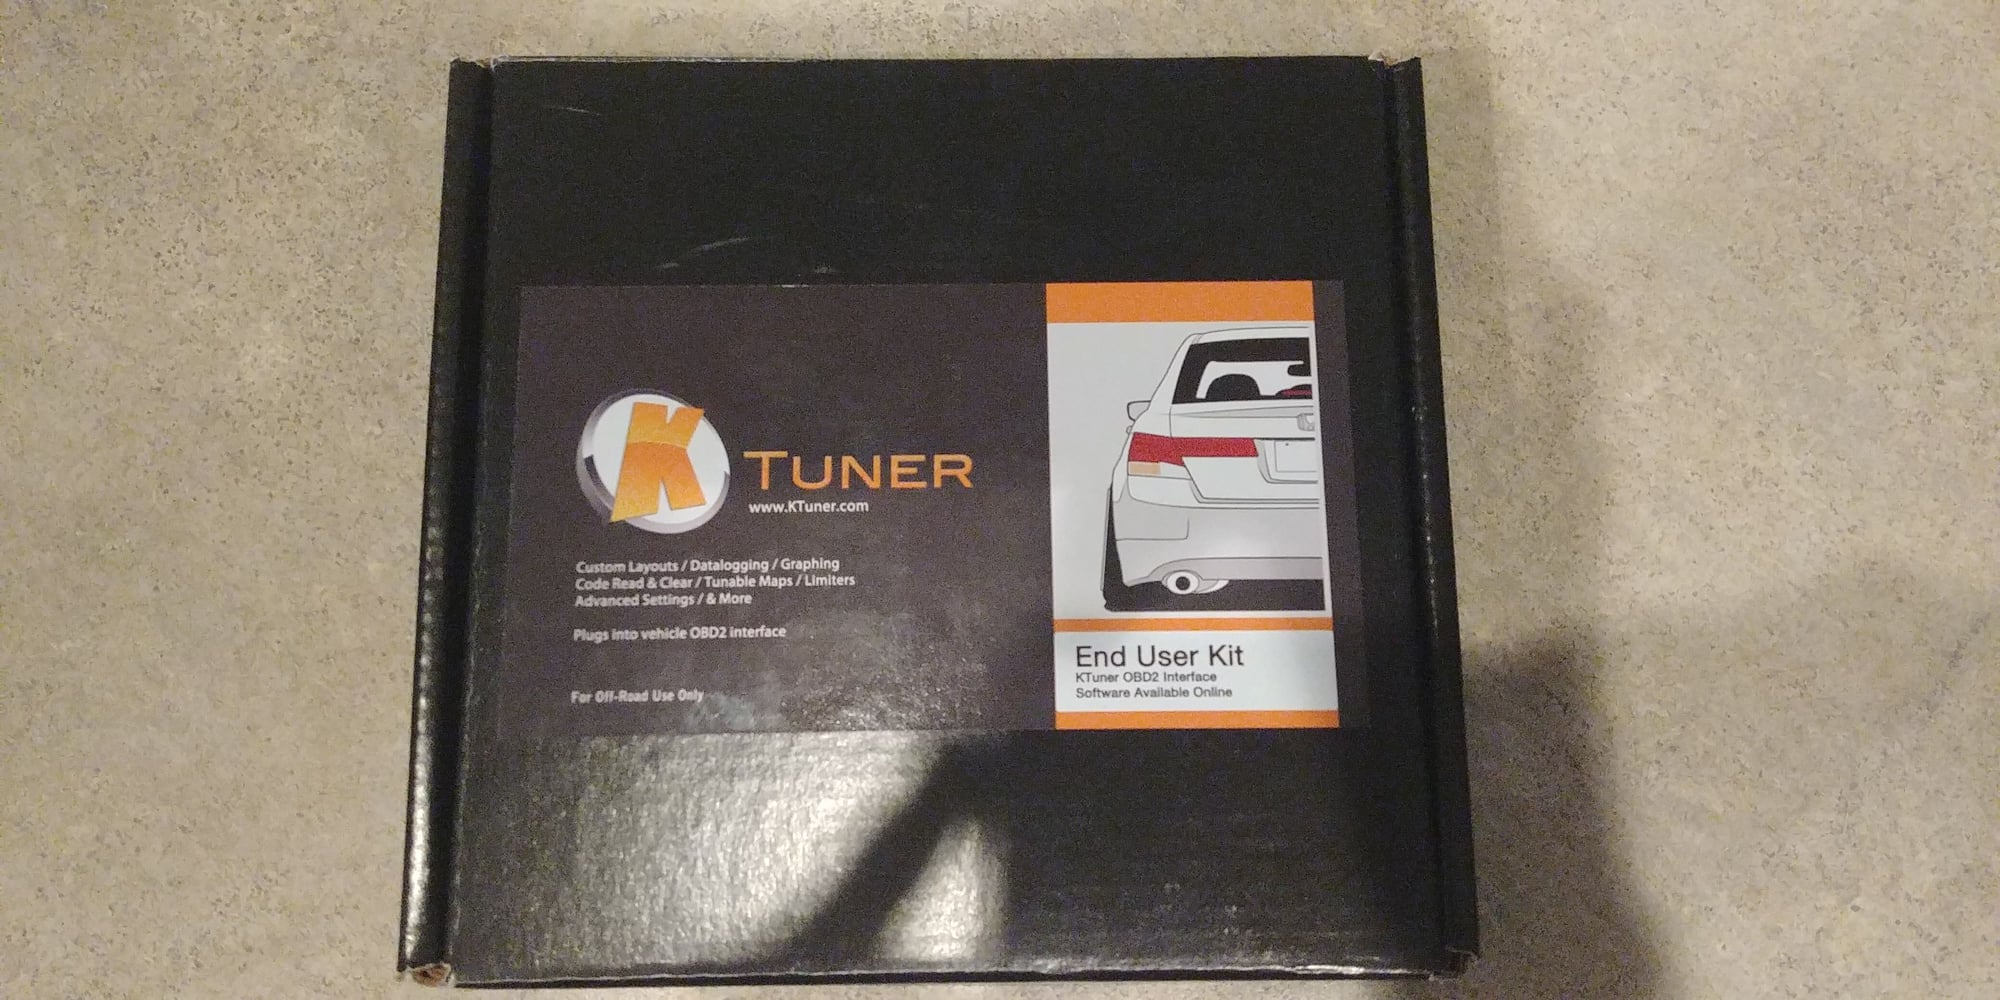 Miscellaneous - FS: KTuner - 4G TL MT - Used - 2009 to 2014 Acura TL - Orlando, FL 32824, United States